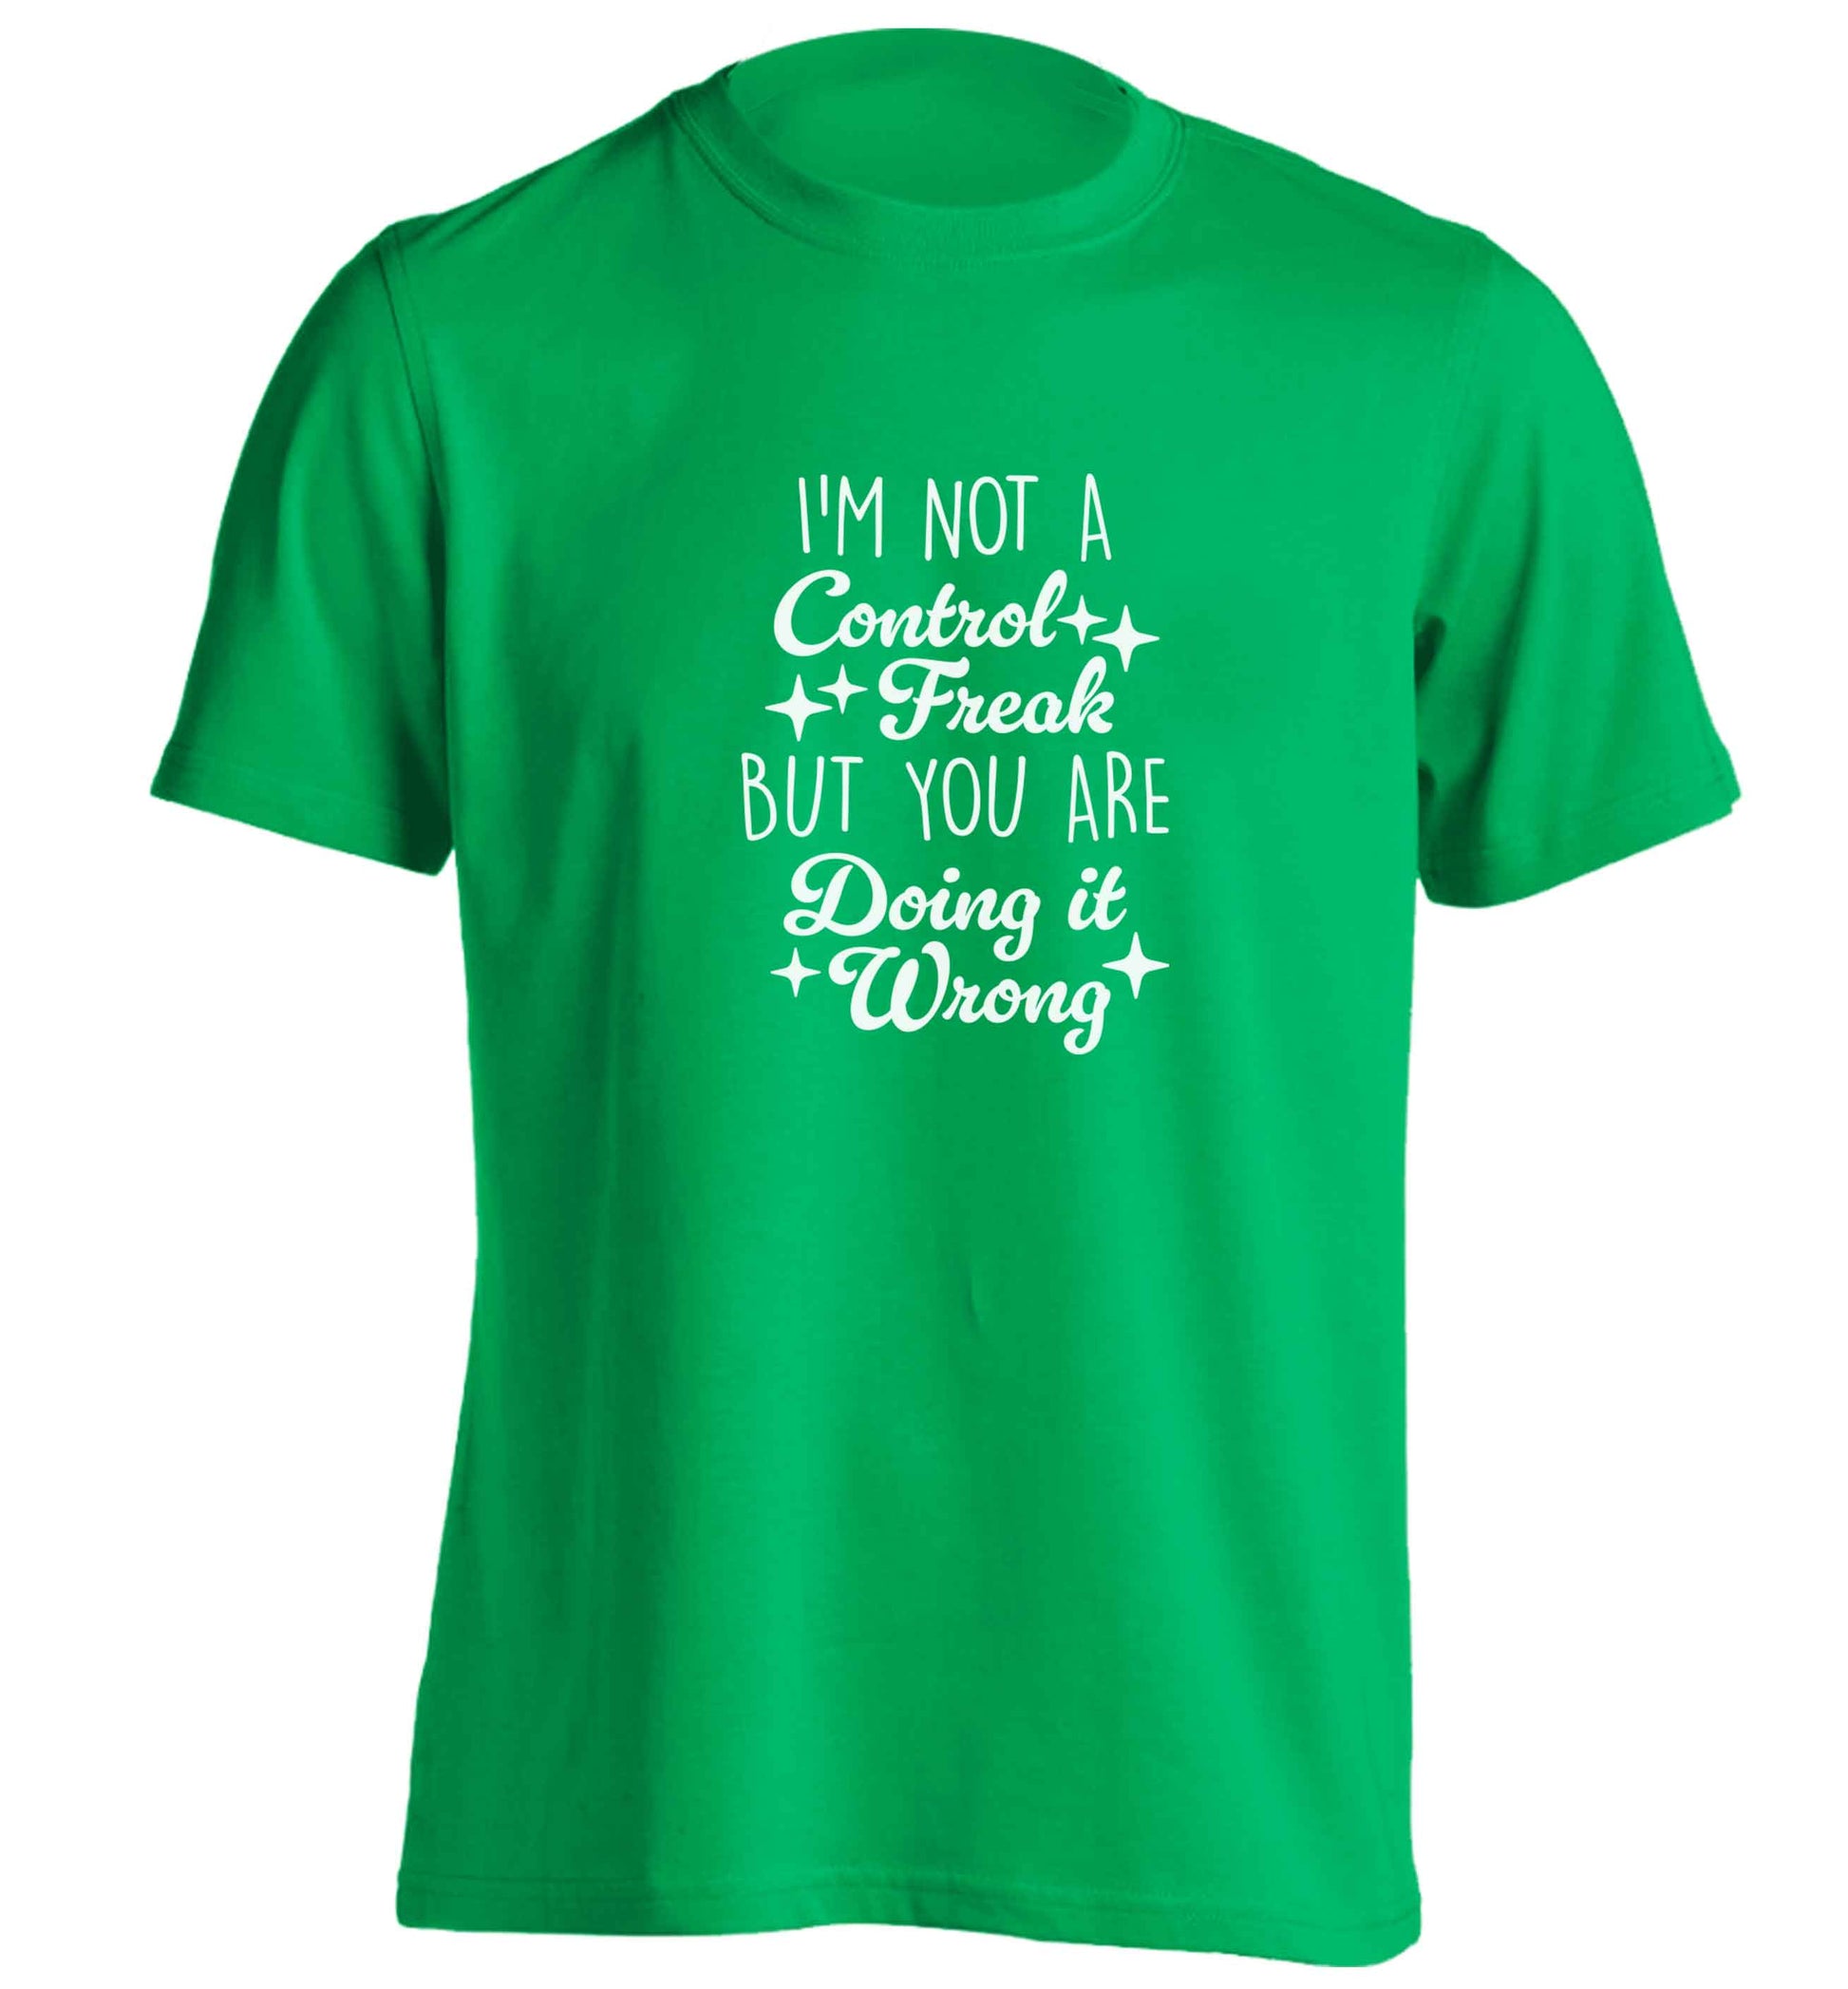 I'm not a control freak but you are doing it wrong adults unisex green Tshirt 2XL